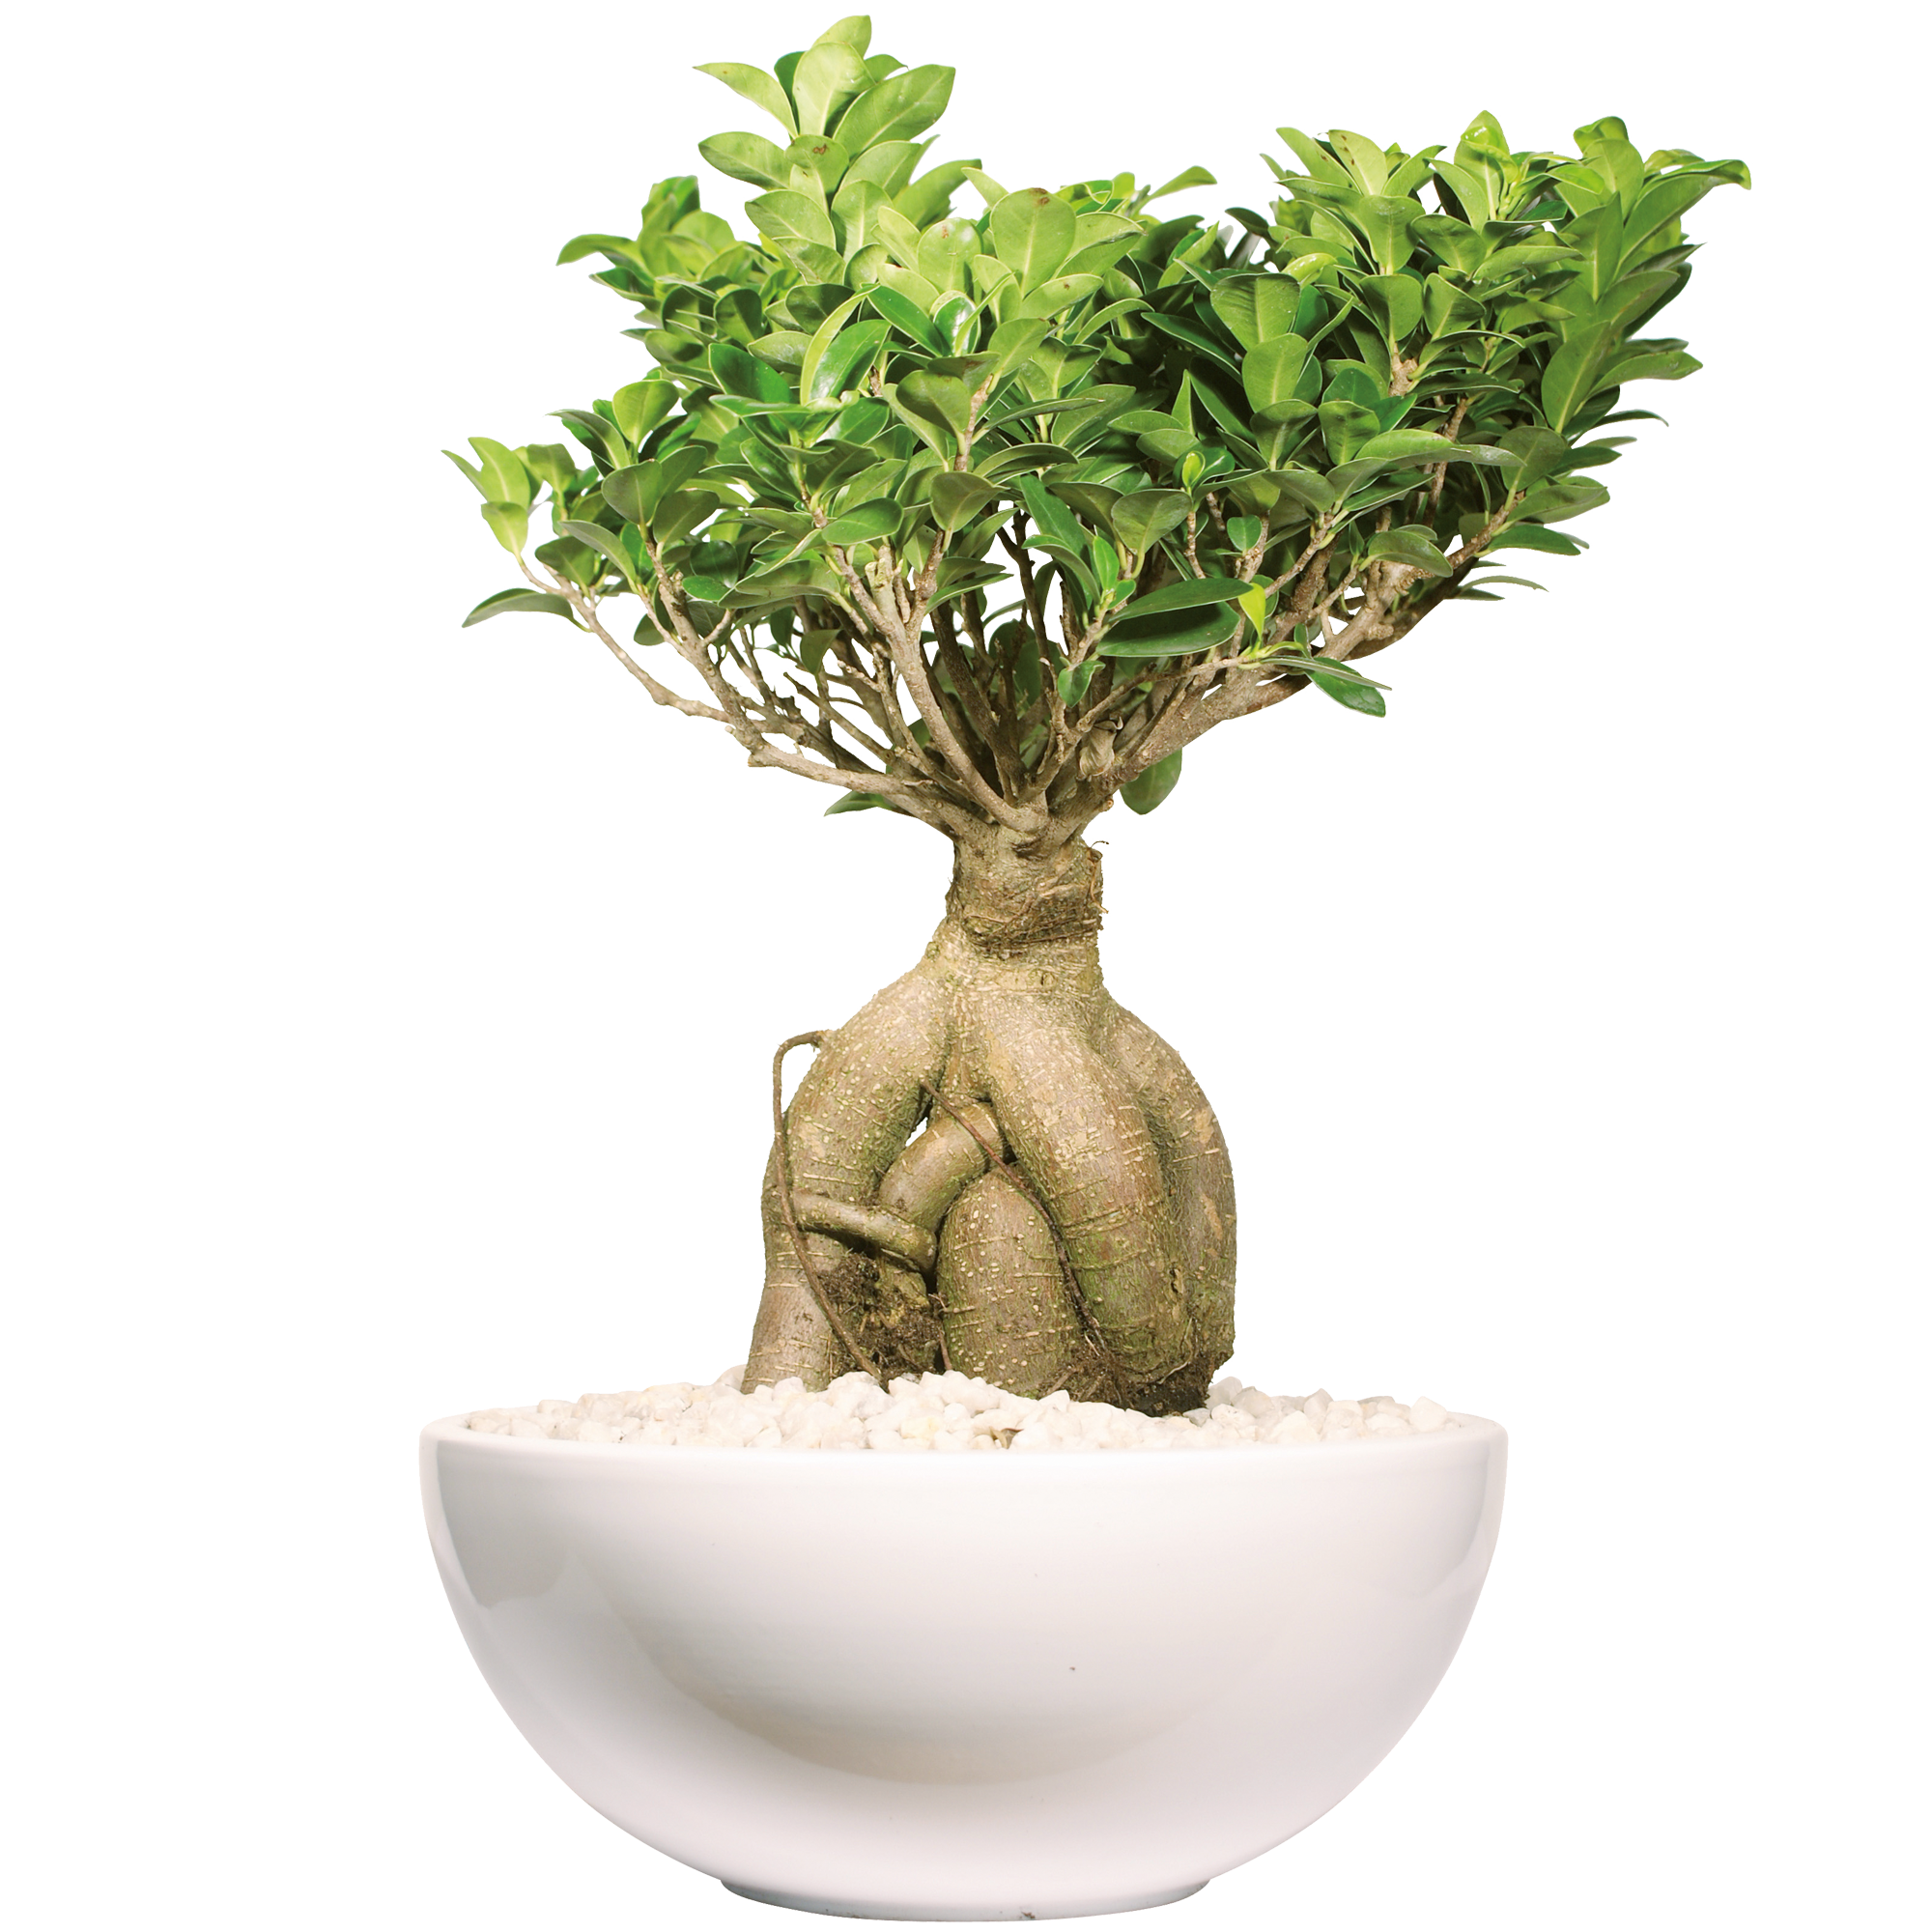 Zimmerbonsai Ficus 'Ginseng' in Schale Salsa 30 cm + product picture